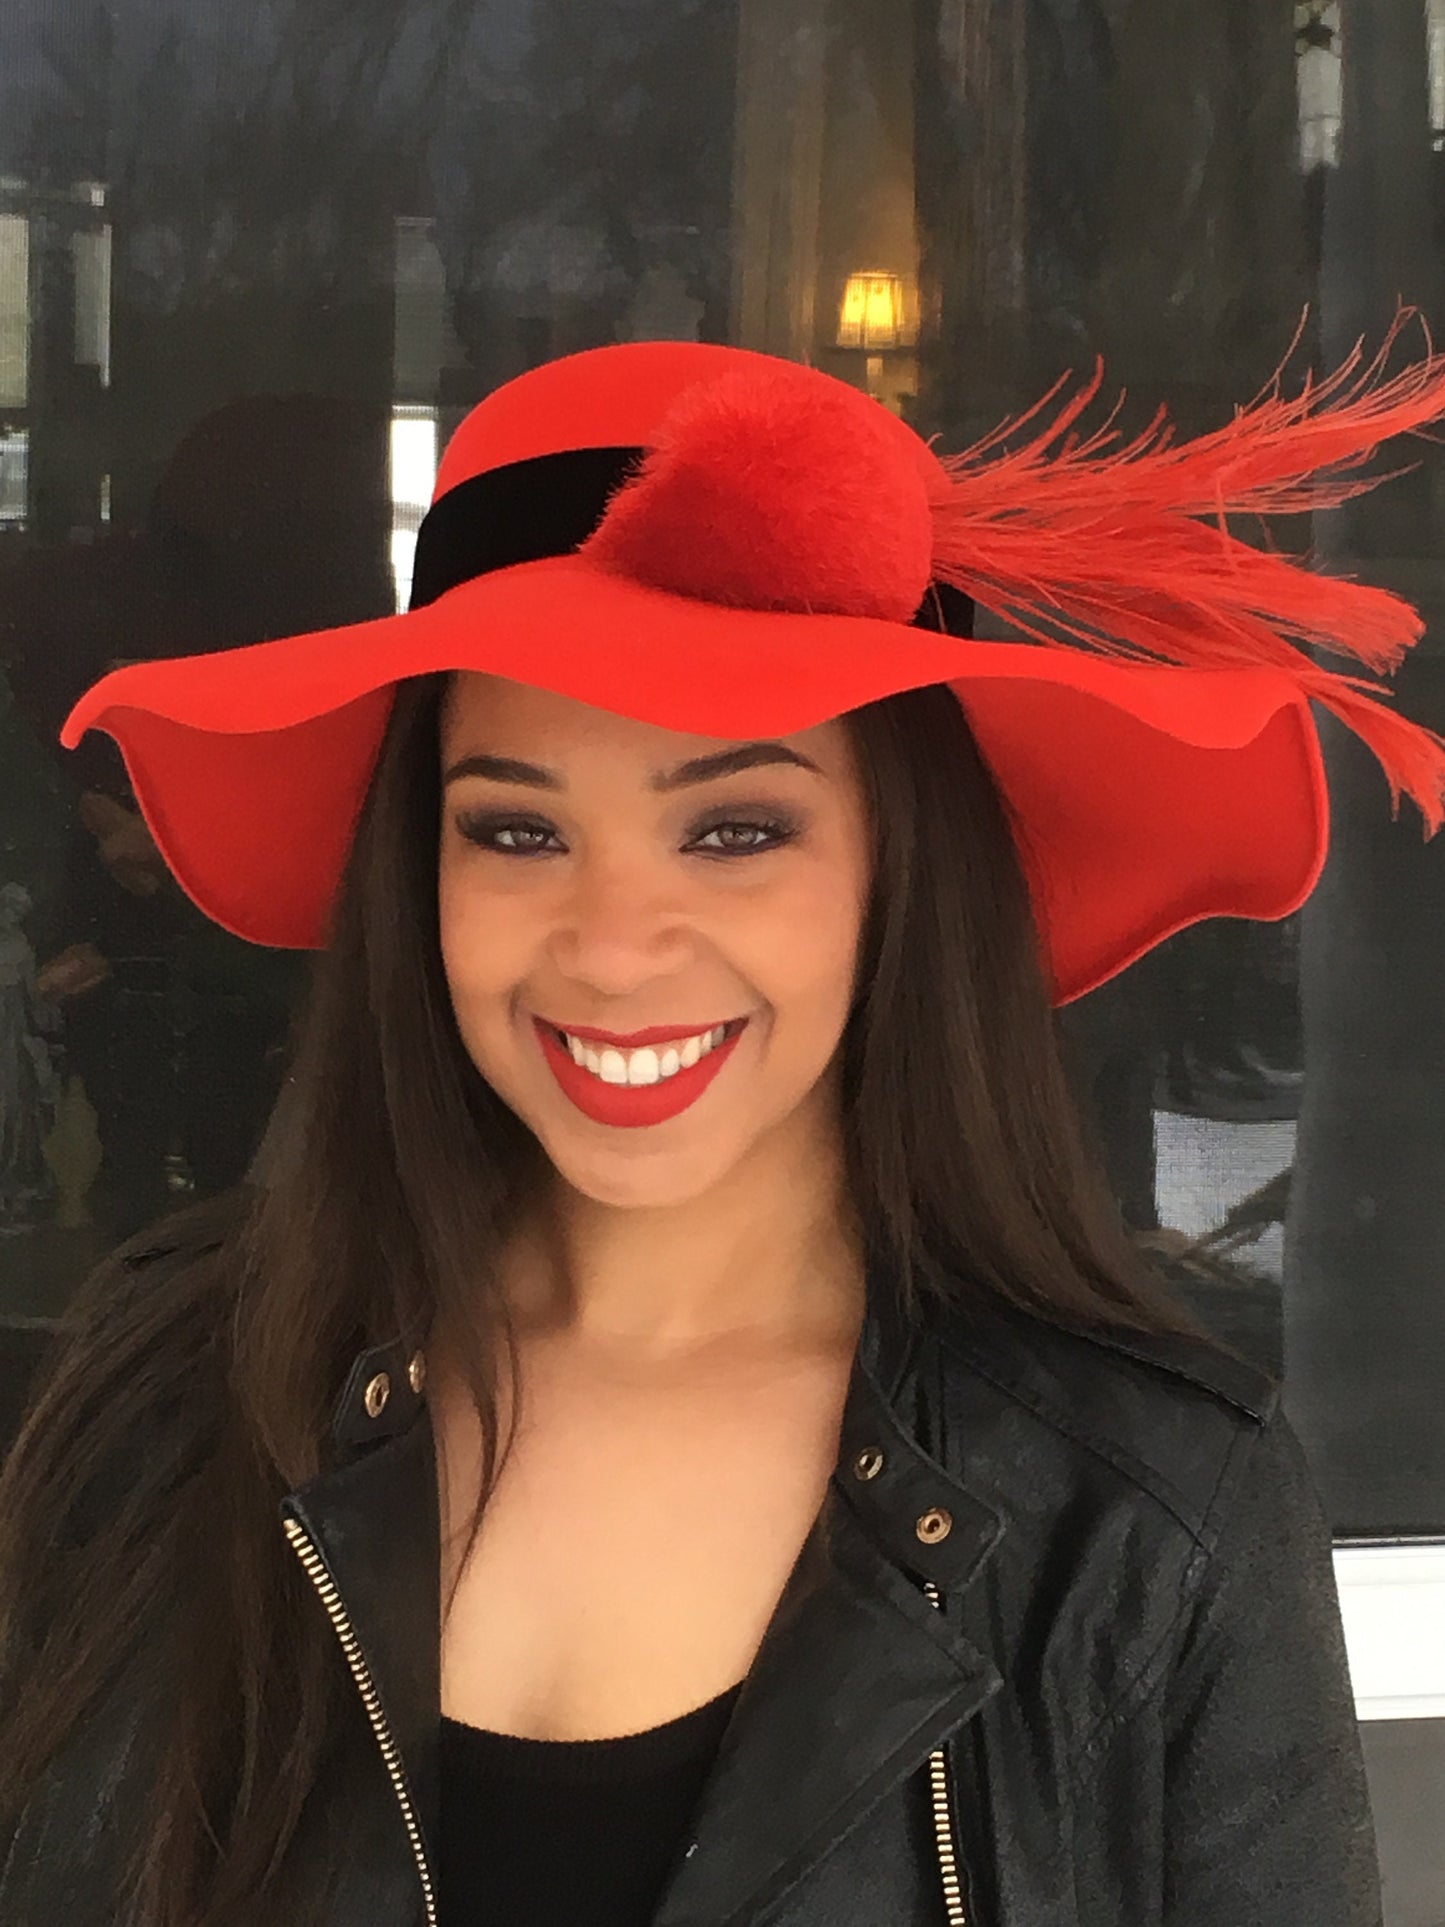 Red Velour Felt Wavy Wide Brim Dress Hat! Red Peacock Feathers-Large Silk PomPom-Church Hat-Christmas Hat-Winter Race Hat-Holiday Party Hat-